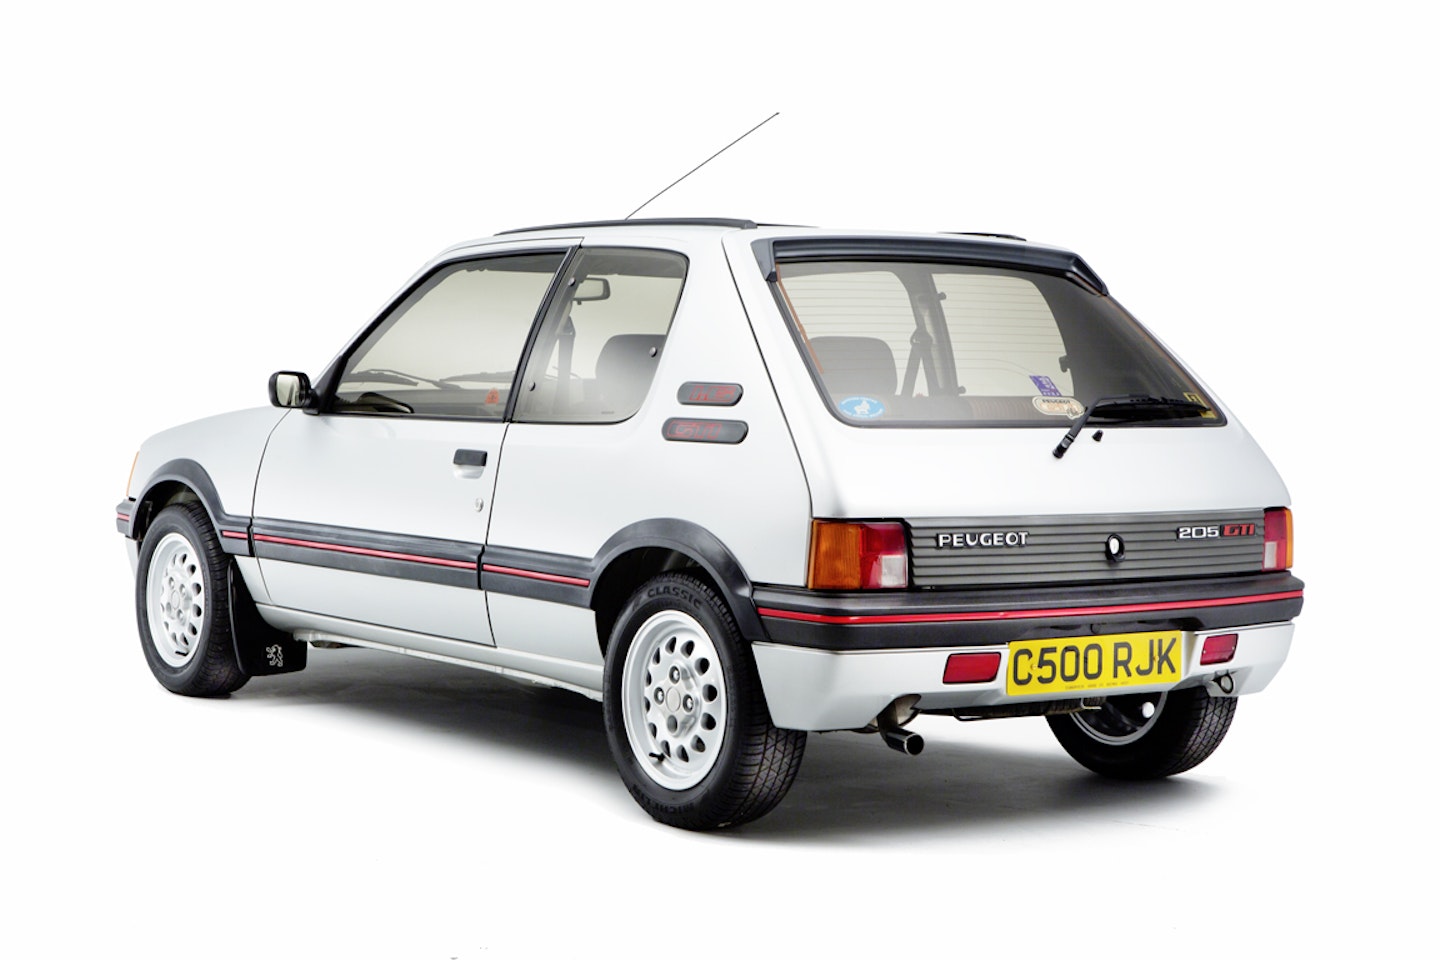 The Peugeot 205 GTI Buying Guide - '80s hot hatch perfection